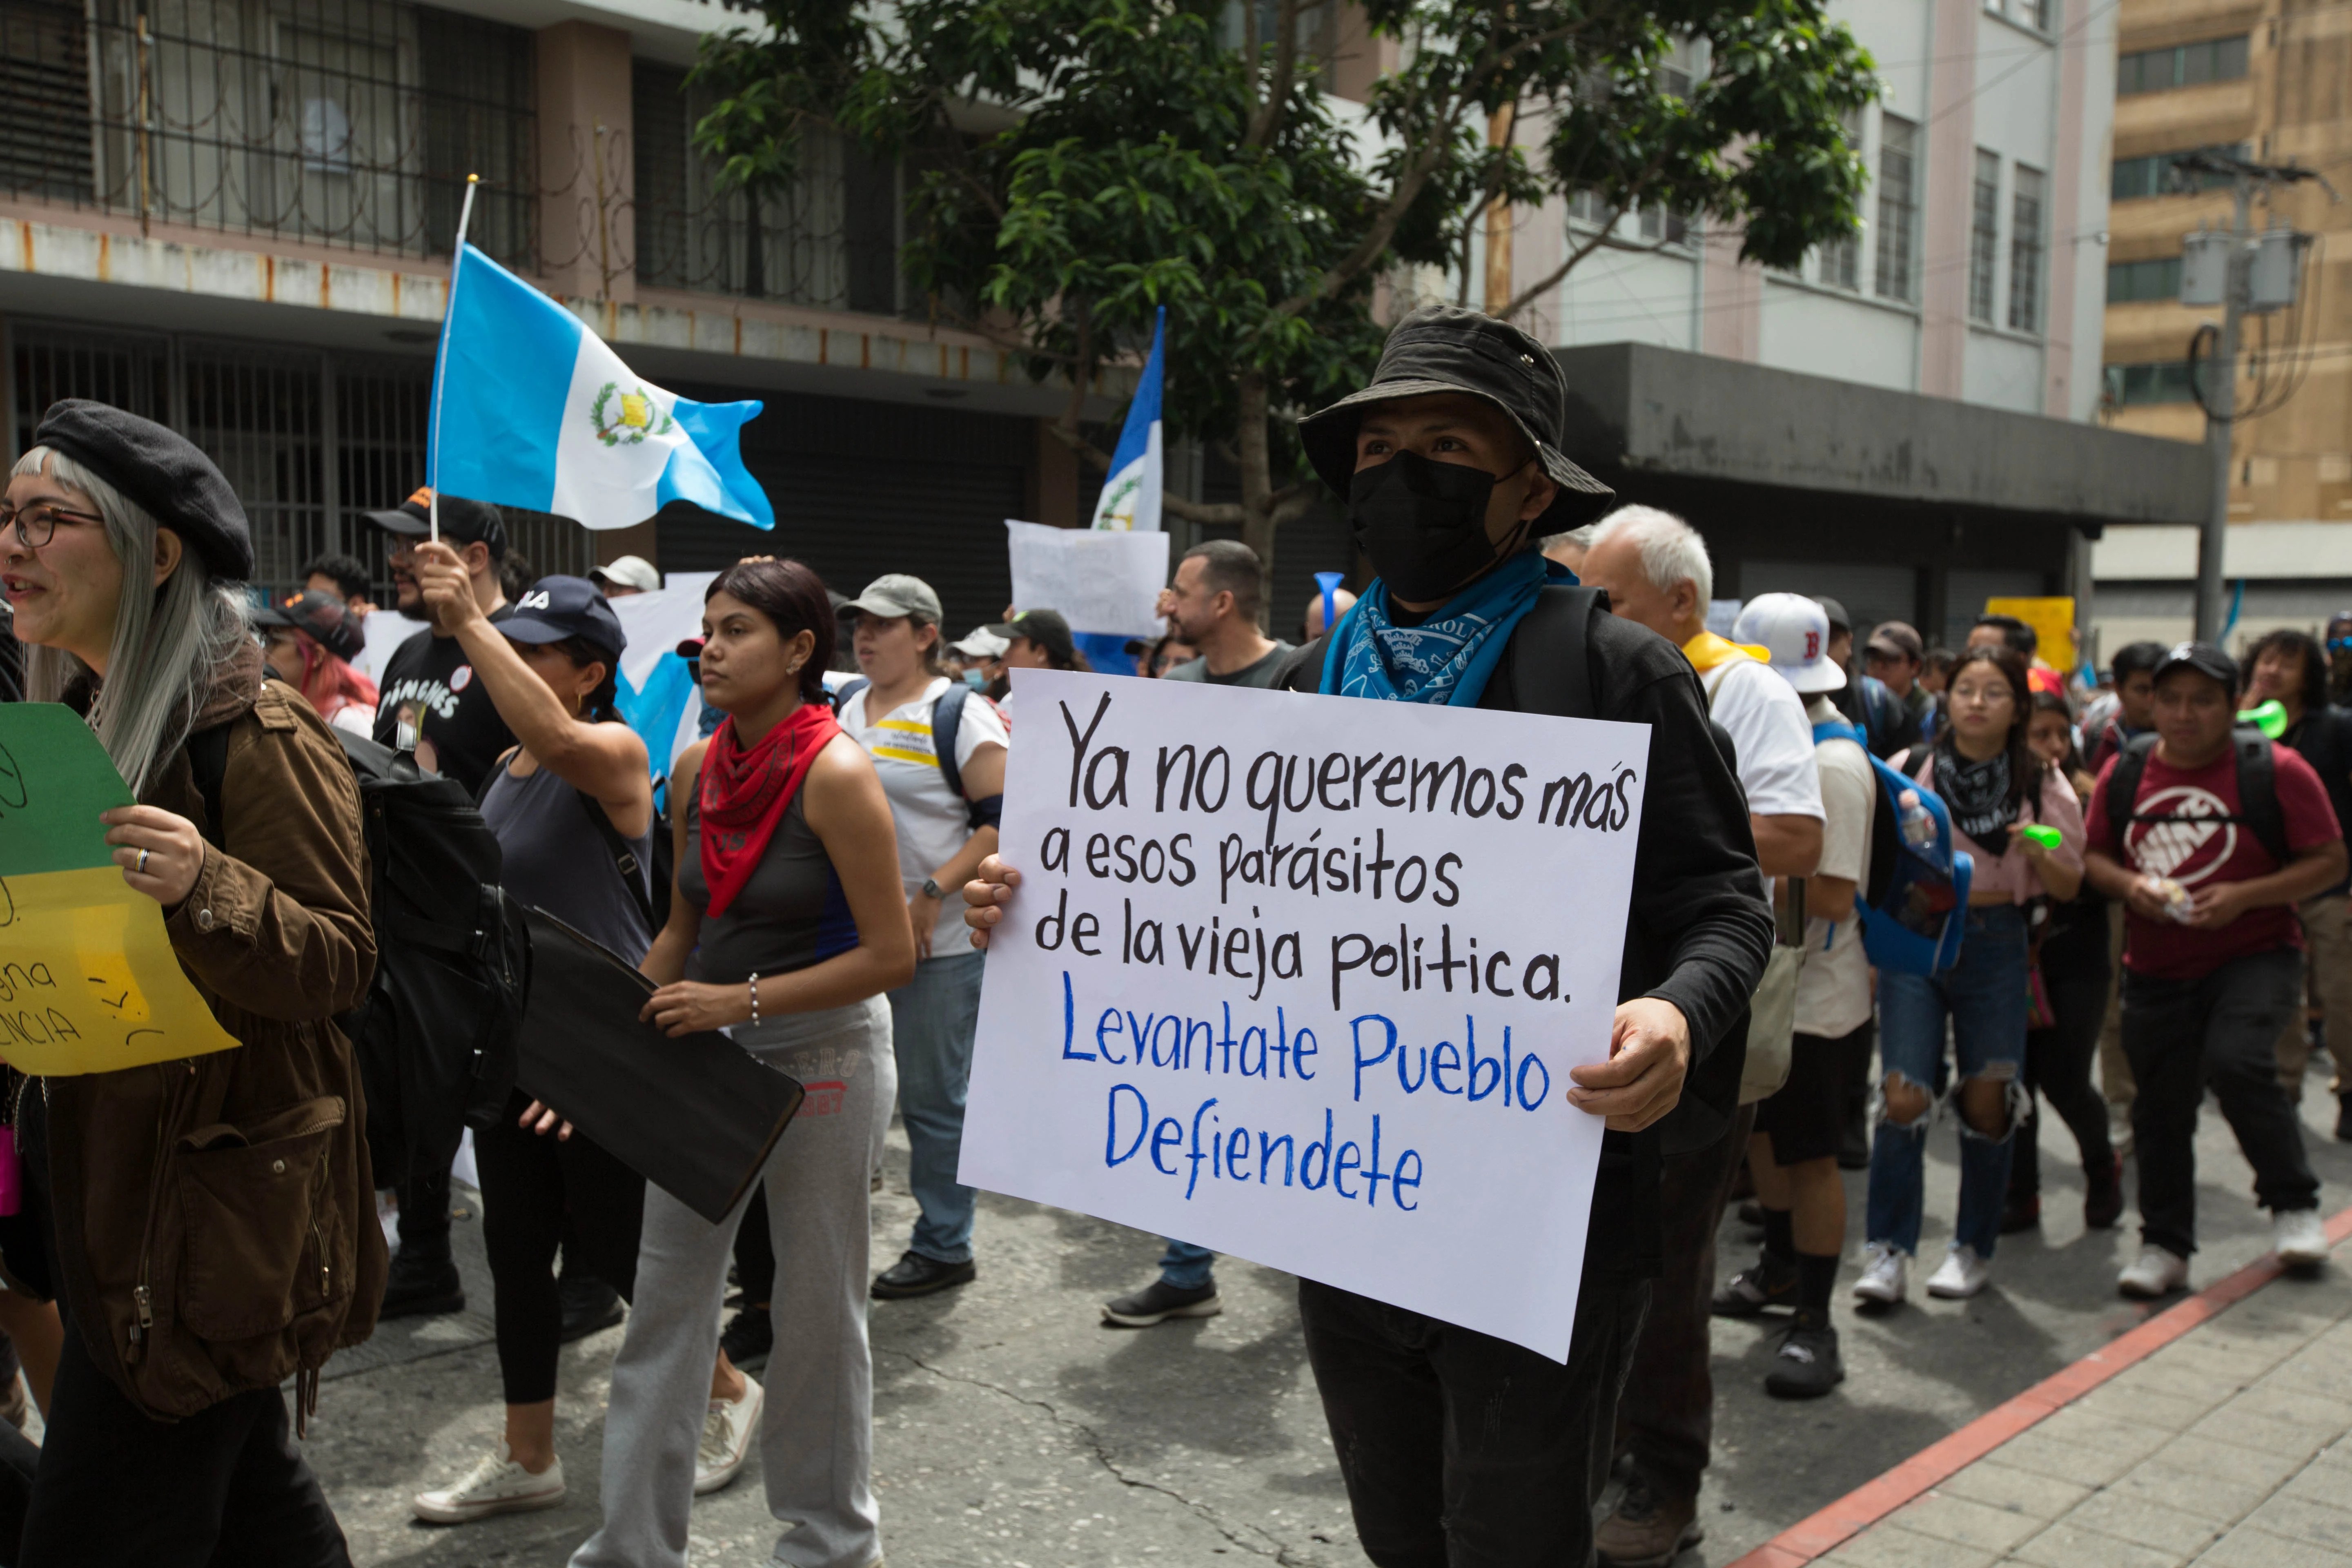 Democracy in Jeopardy: Concerns Mount as Guatemala's Leading Party Faces Suspension